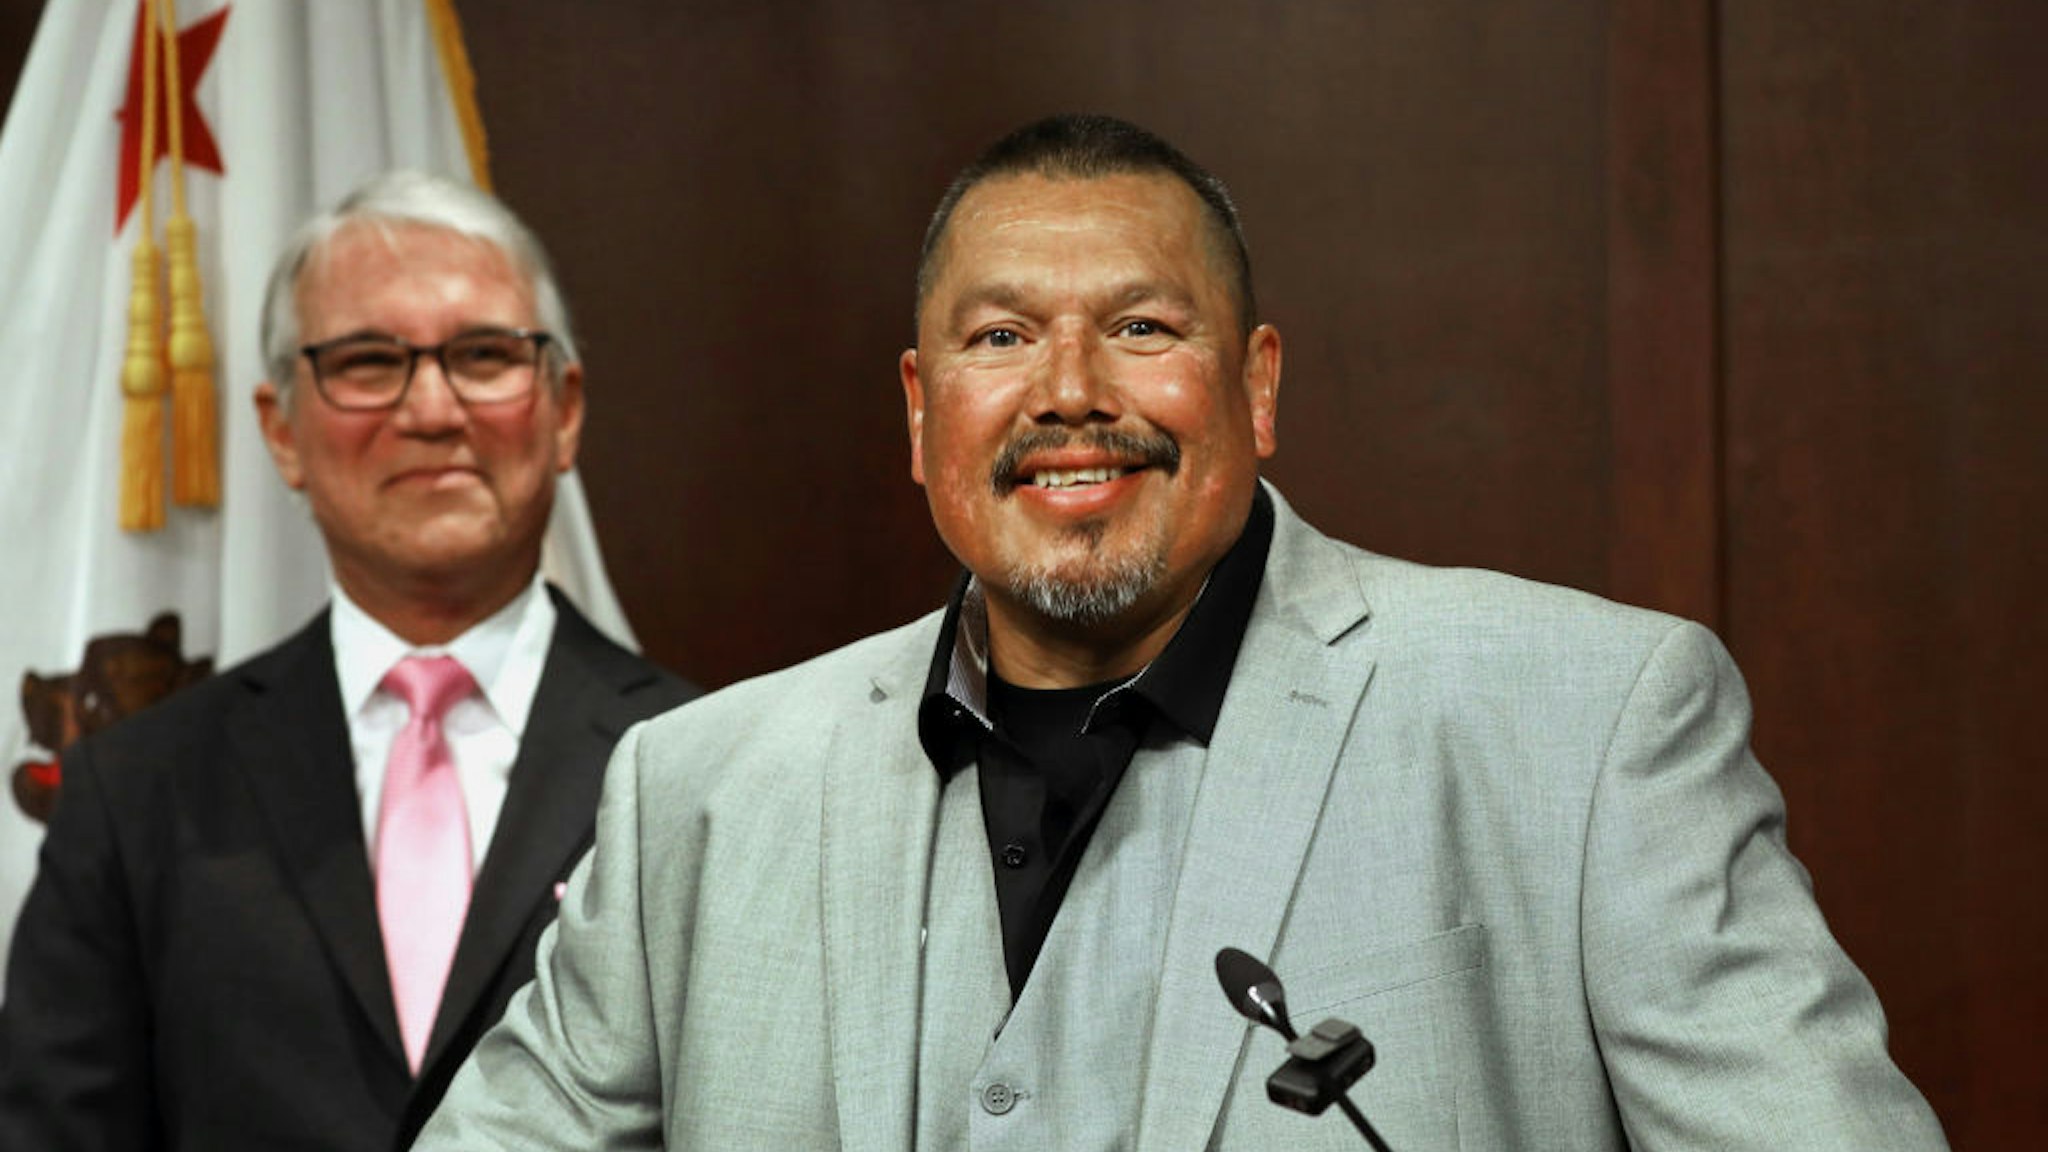 Los Angeles, CaliforniaMay 25, 2023On Thursday, May 25, 2023, District Attorney Gascón, left, announced the exoneration of Daniel Saldana, center, who was wrongly convicted of attempted murder of six people in 1990.